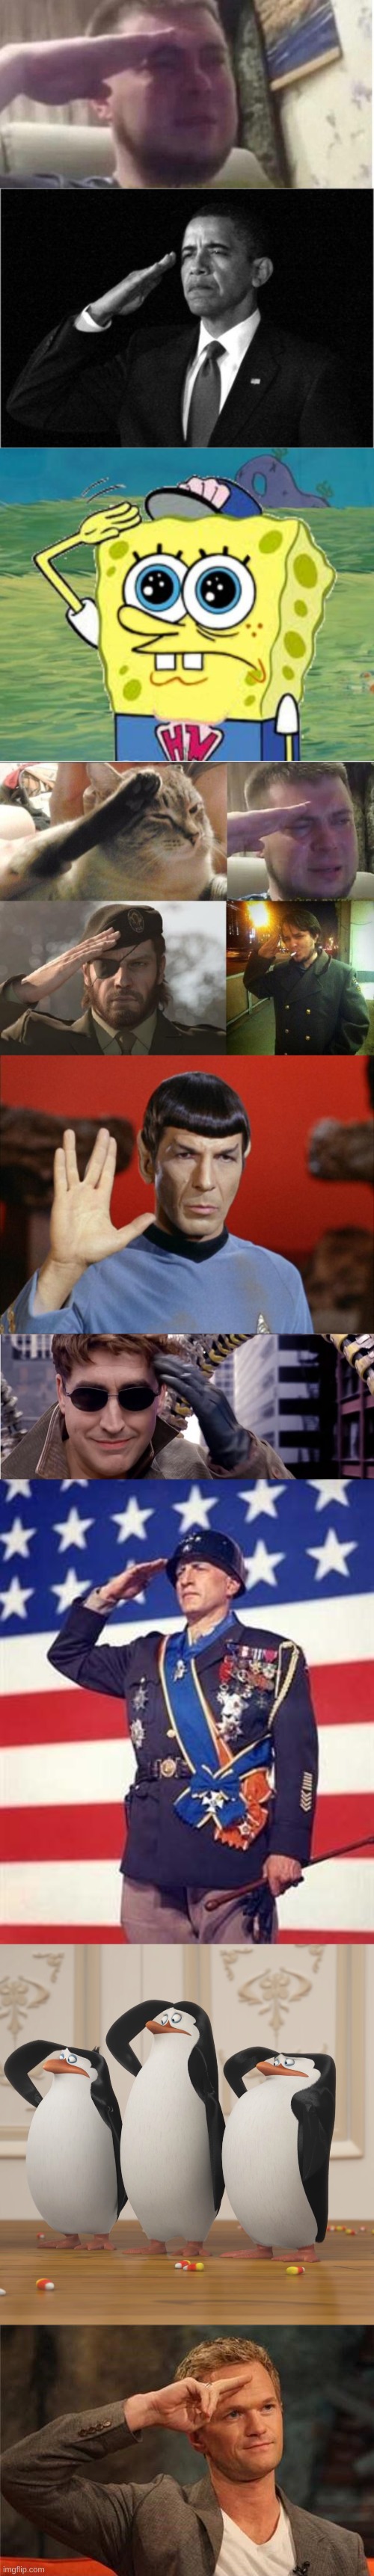 image tagged in crying salute,obama-salute,spongebob salute,ozon's salute,spock salute,salute | made w/ Imgflip meme maker